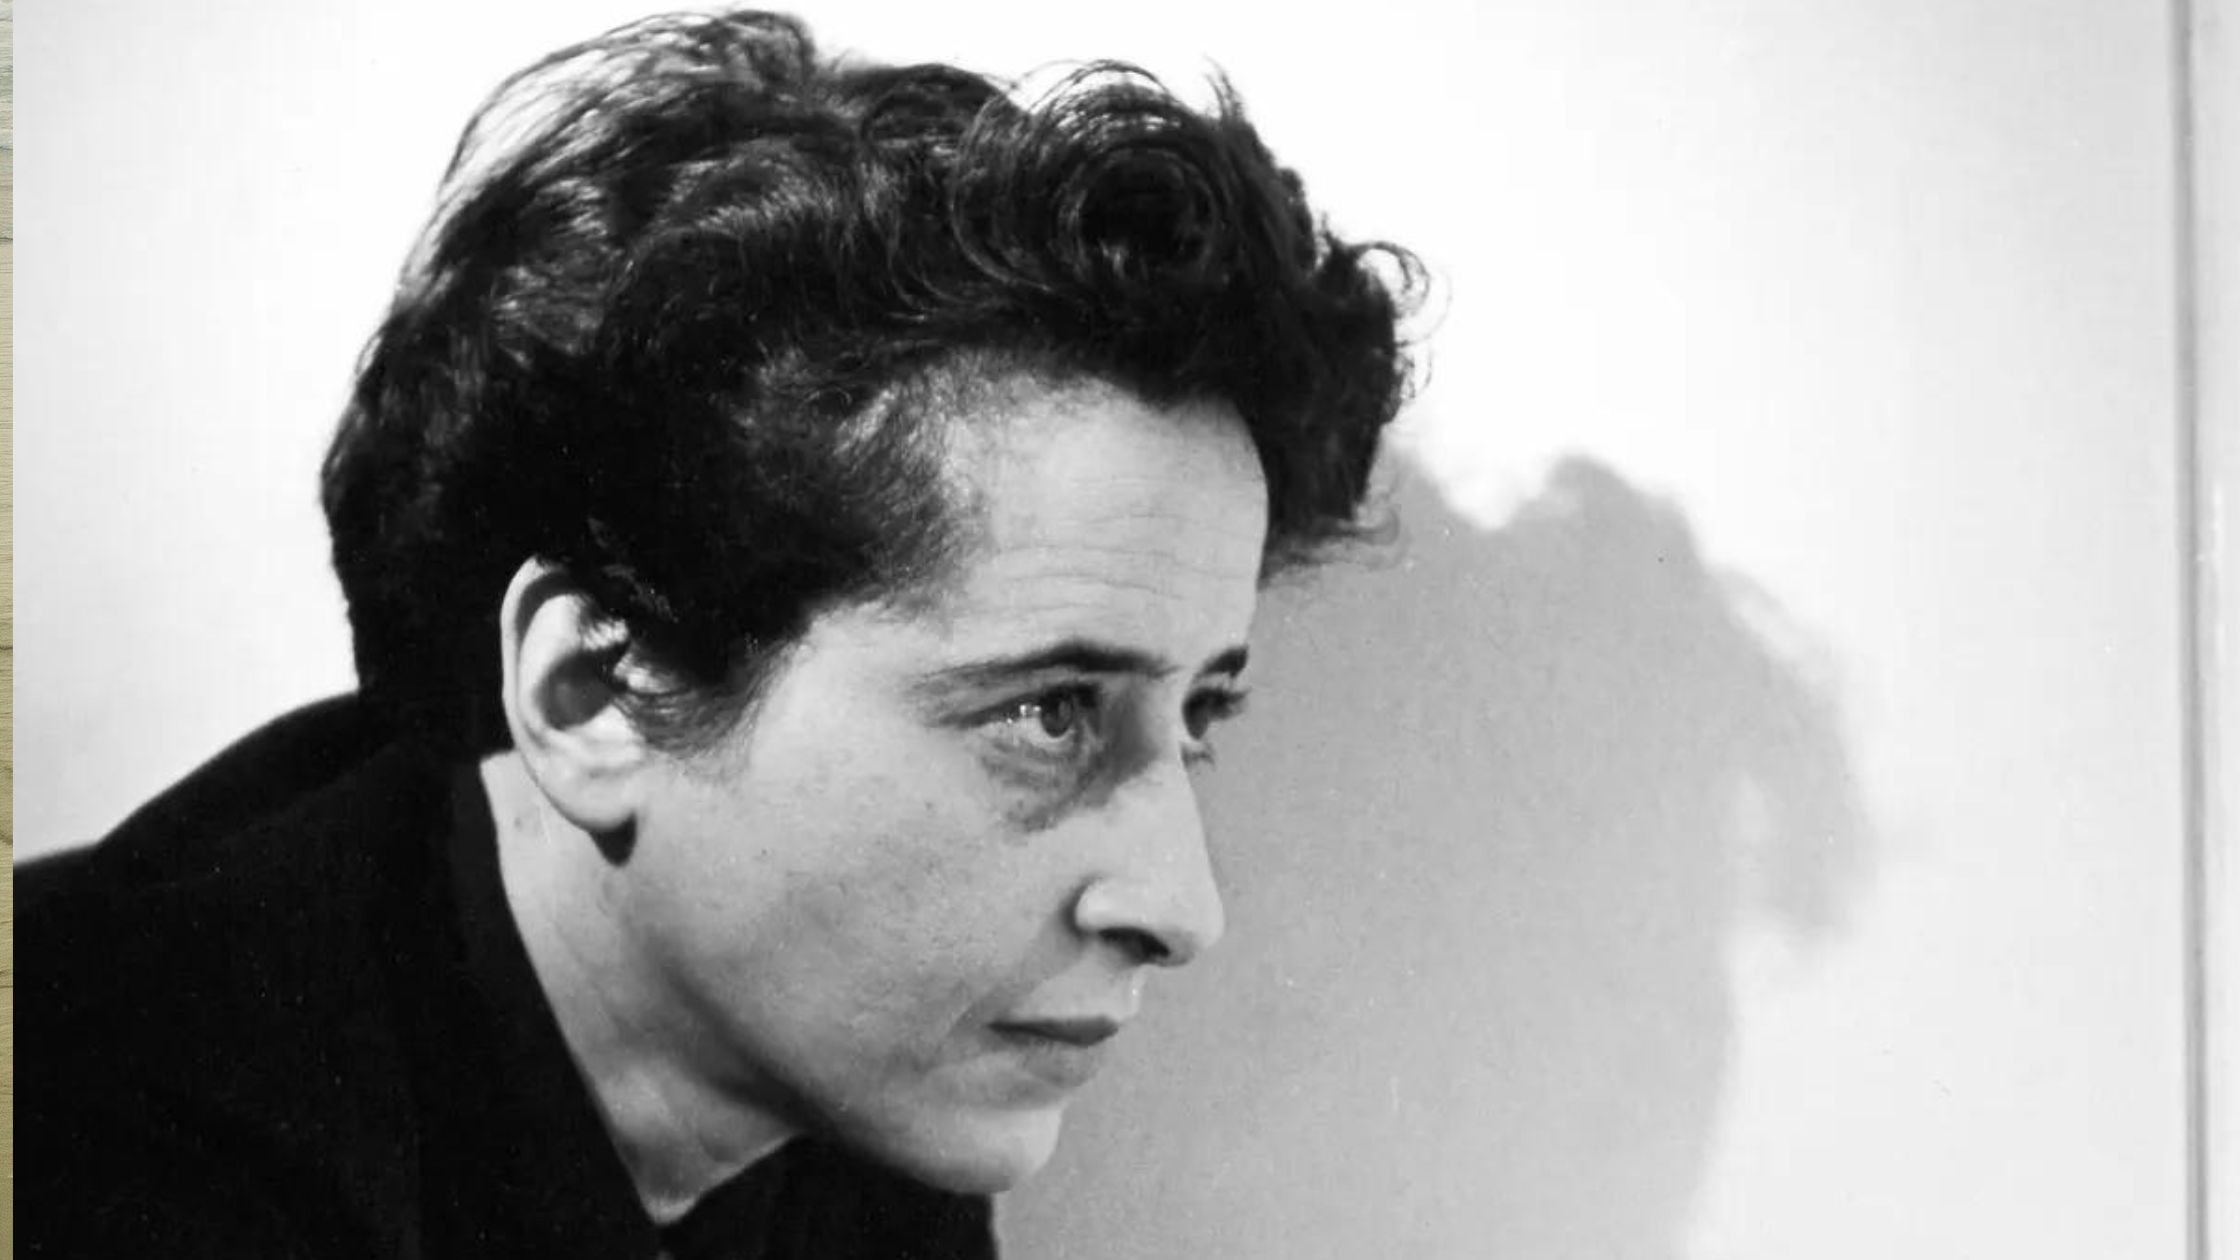 Politics, Power, and Philosophy: What We Can Learn from Hannah Arendt’s Masterpieces